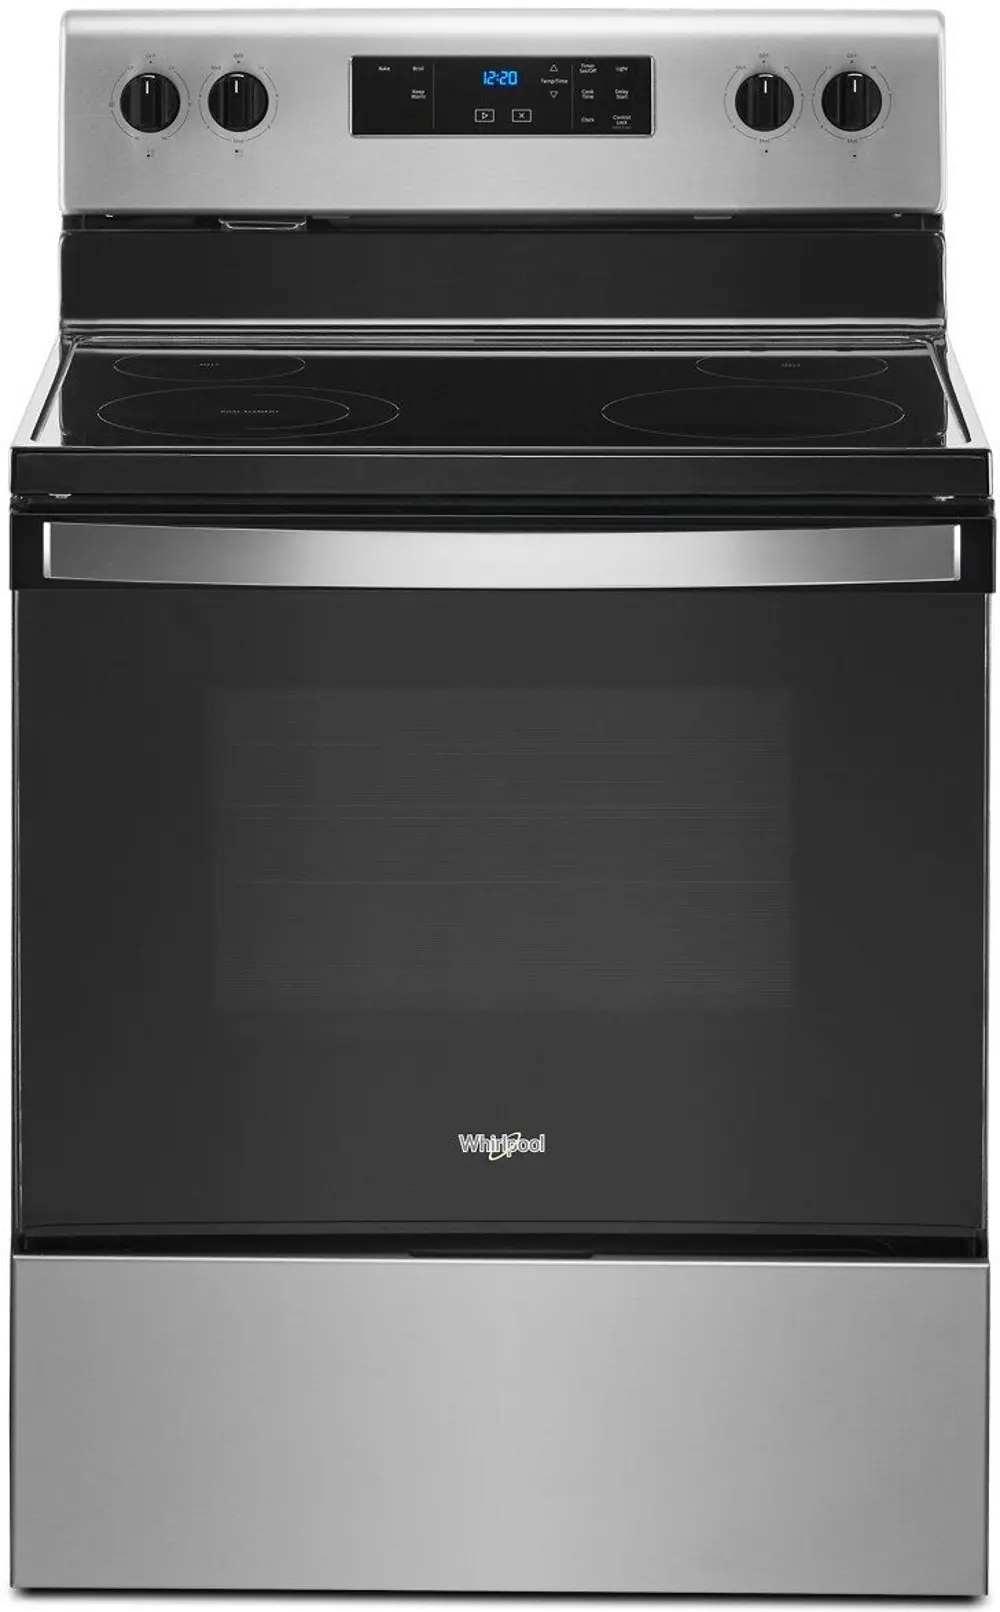 WFE320M0JS Whirlpool 5.3 cu ft Electric Range - Stainless Steel-1